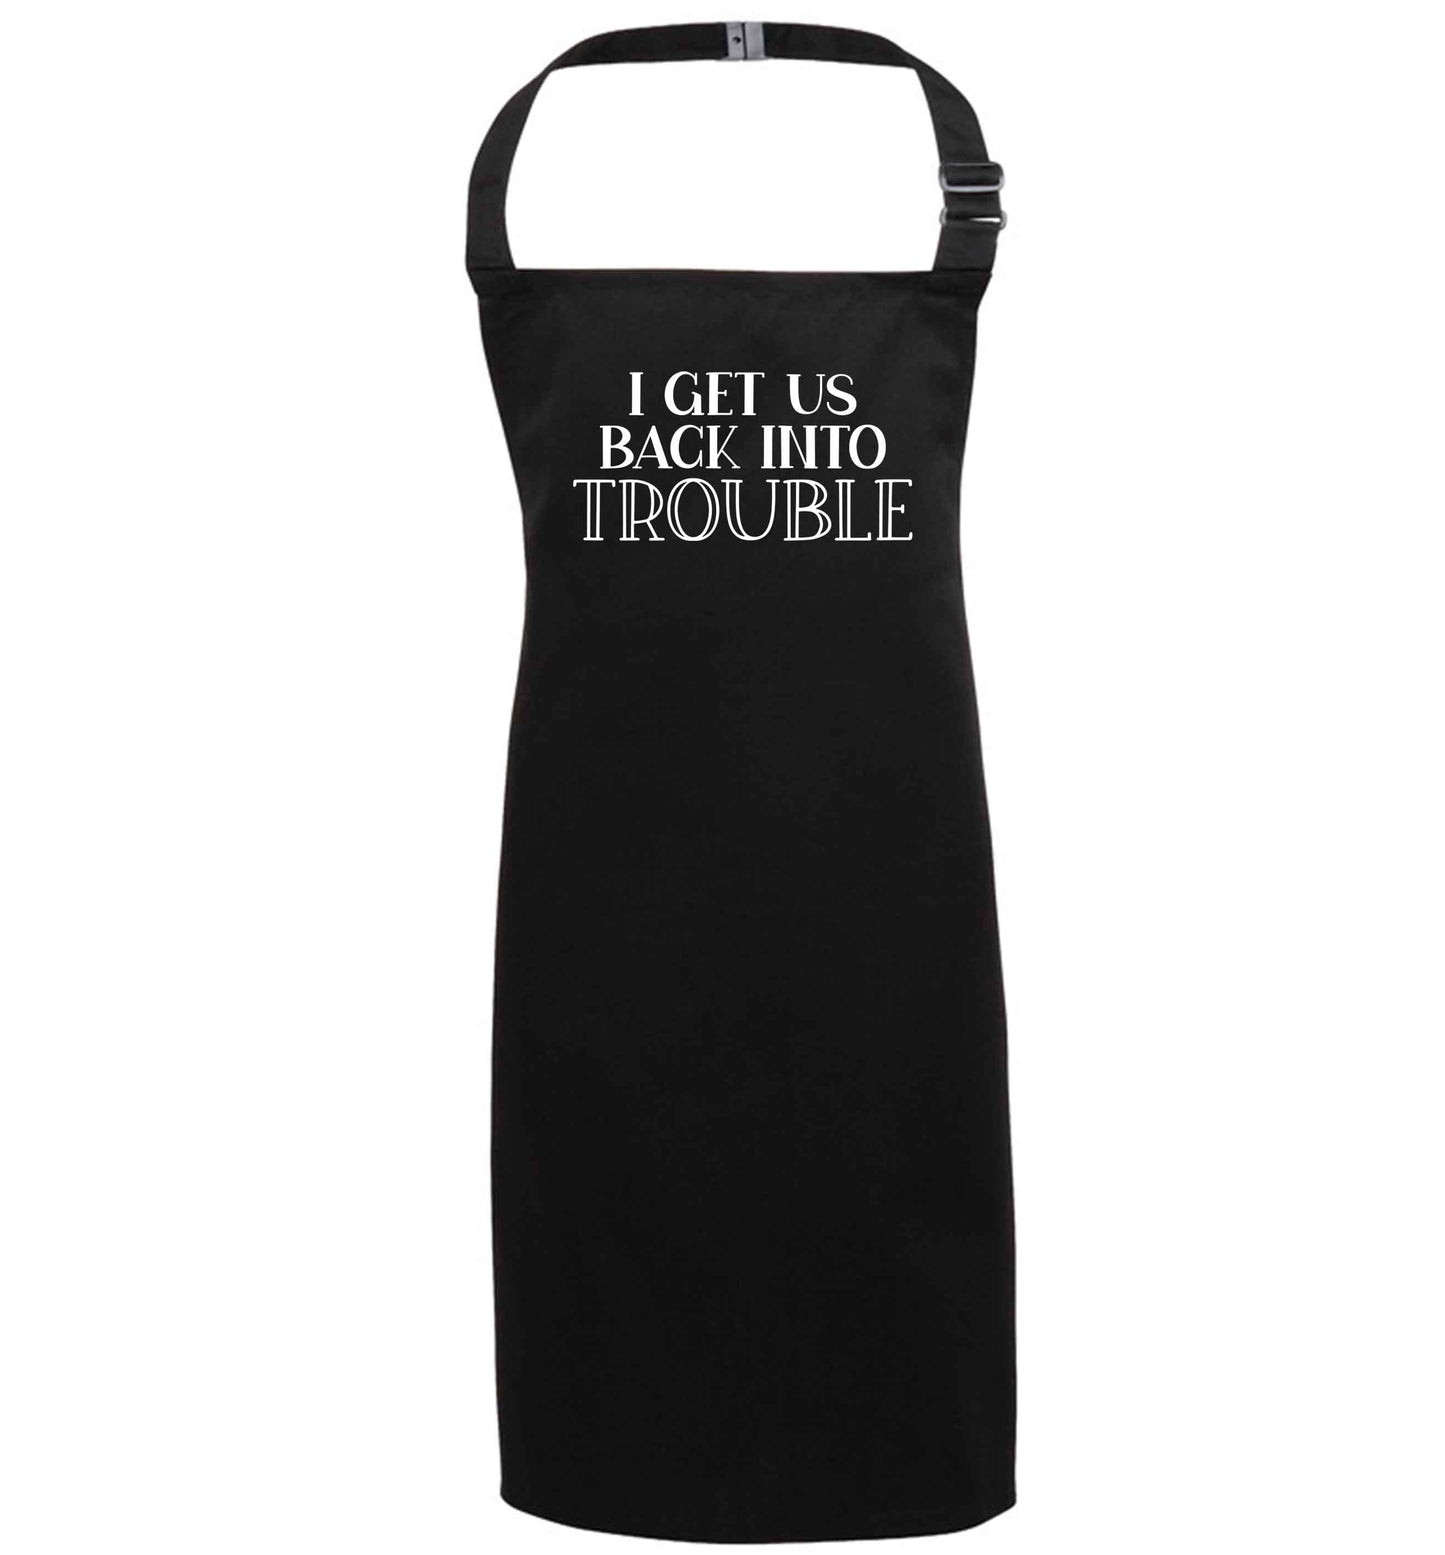 I get us back into trouble black apron 7-10 years